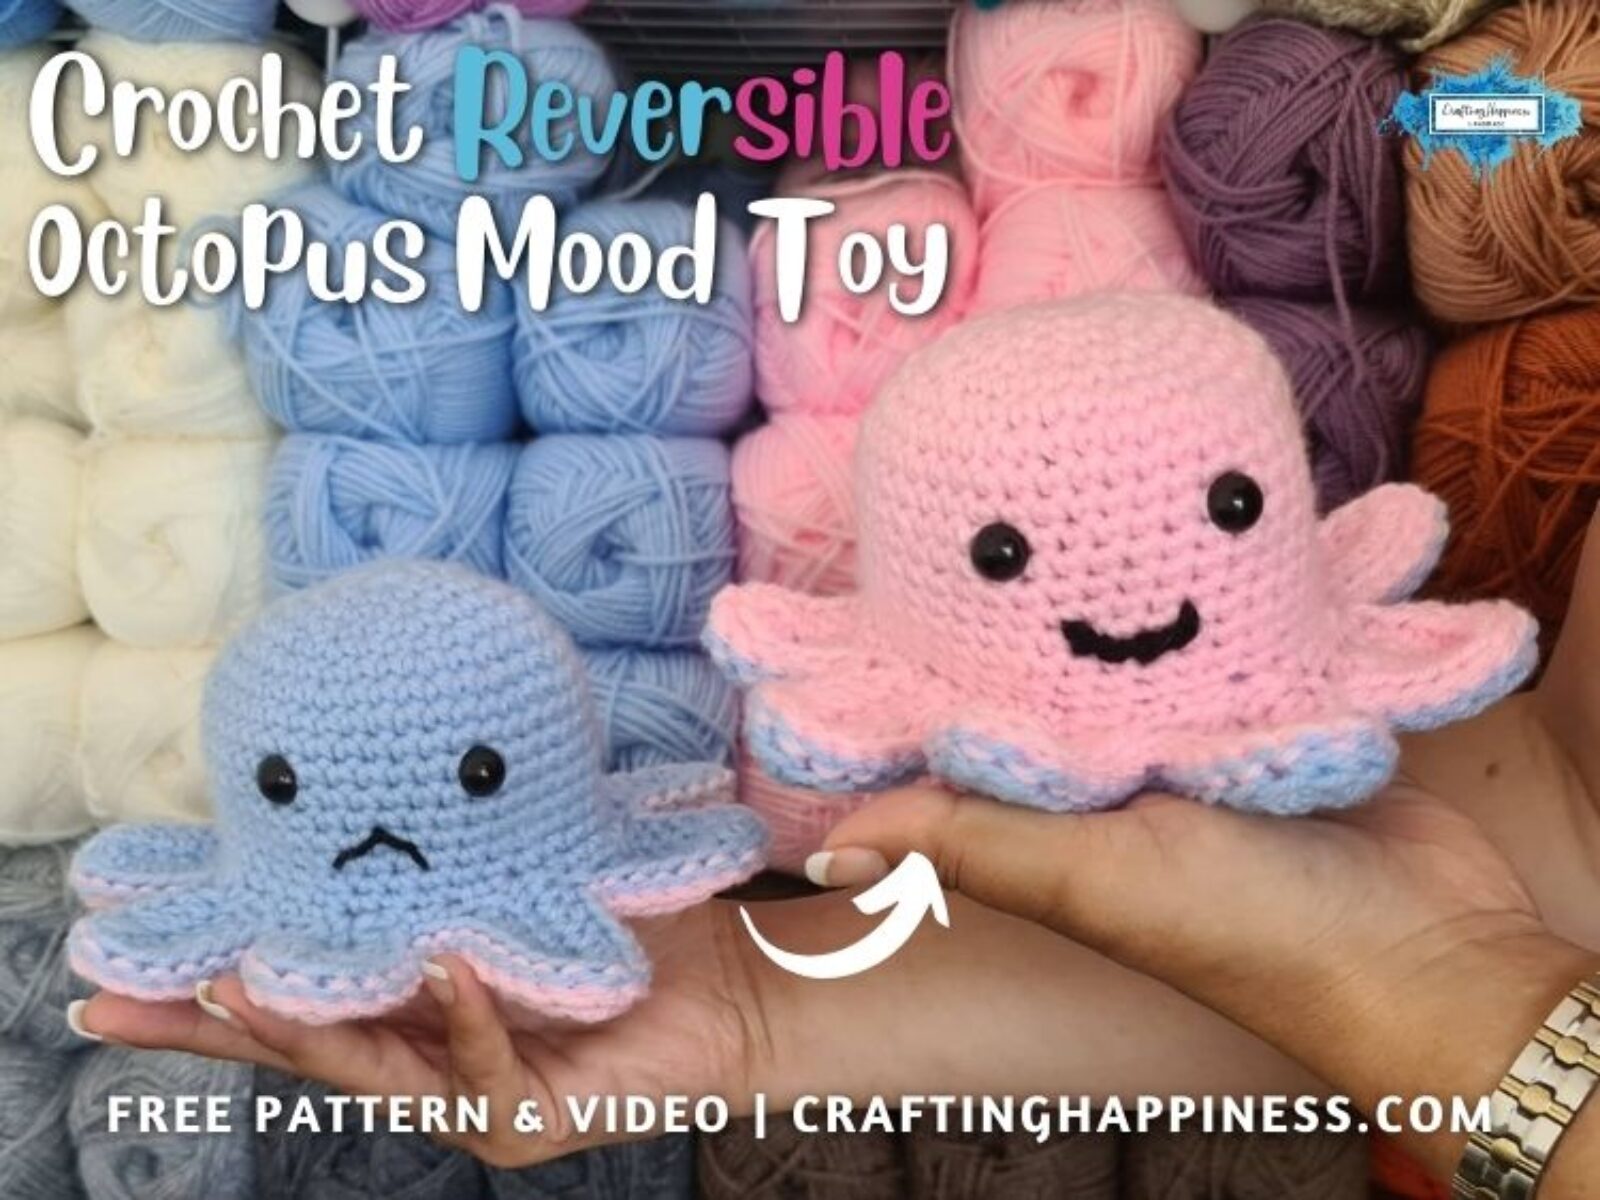 FB BLOG POSTER - Crochet Reversible Octopus Mood Toy Crafting Happiness